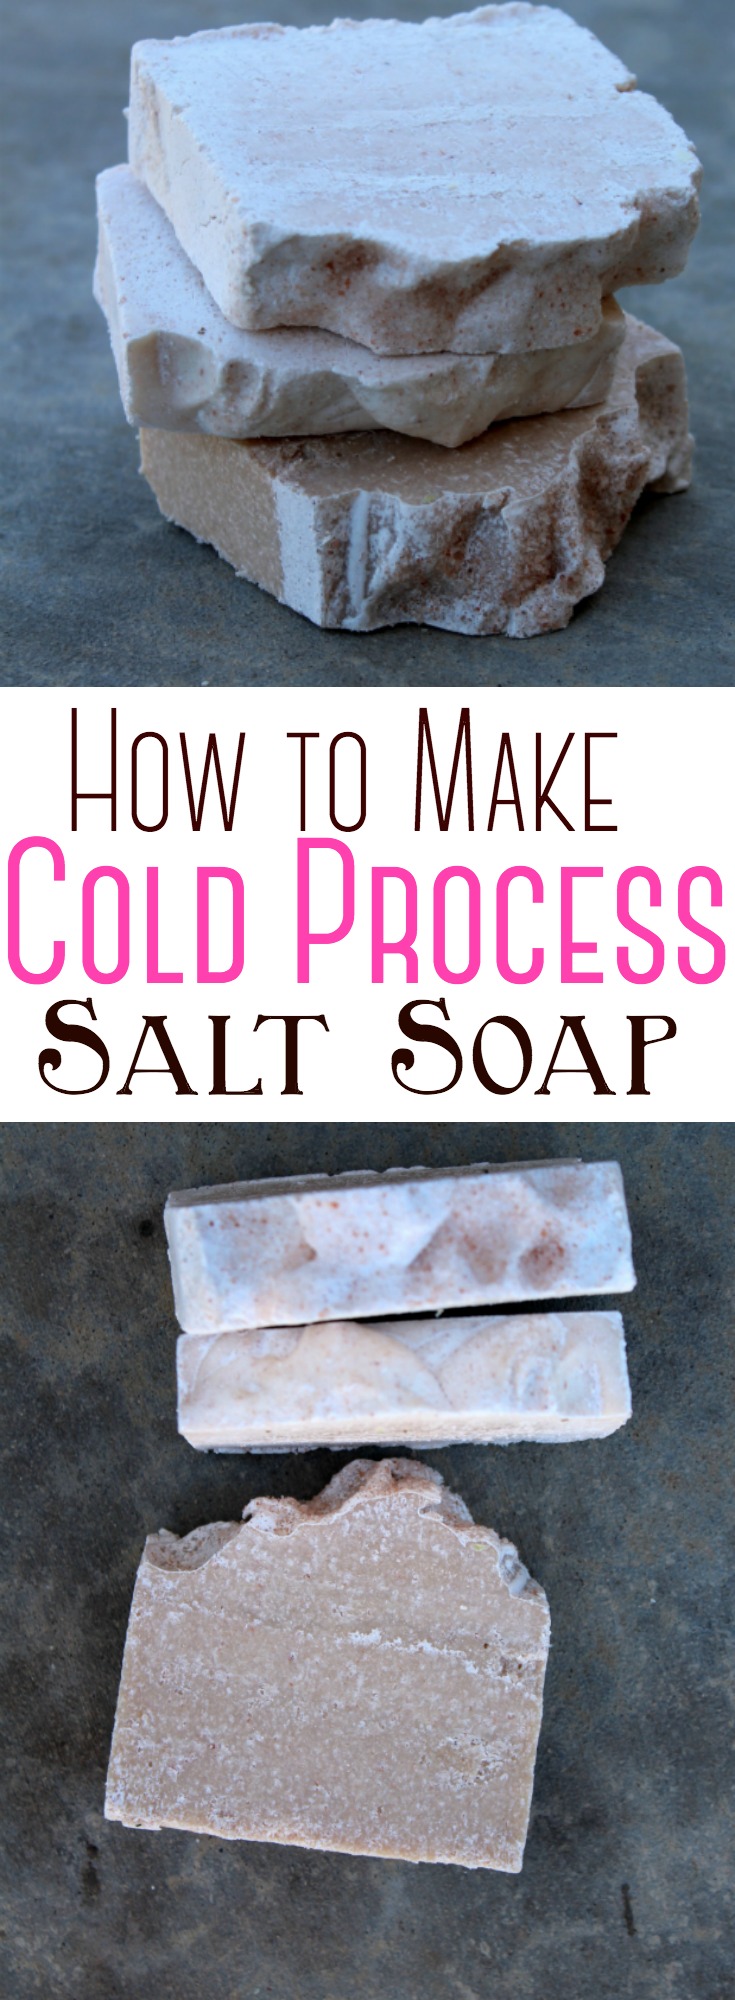 Salt soap bars are a wonderful way to combine a sea salt bath with a natural soap - believe it or not, the final result is a hard bar of soap with a creamy, lotion-like lather. #saltsoap #coldprocess #soap #homemadesoap #soapmaking #himalayanpinksalt #skincare #naturalsoap